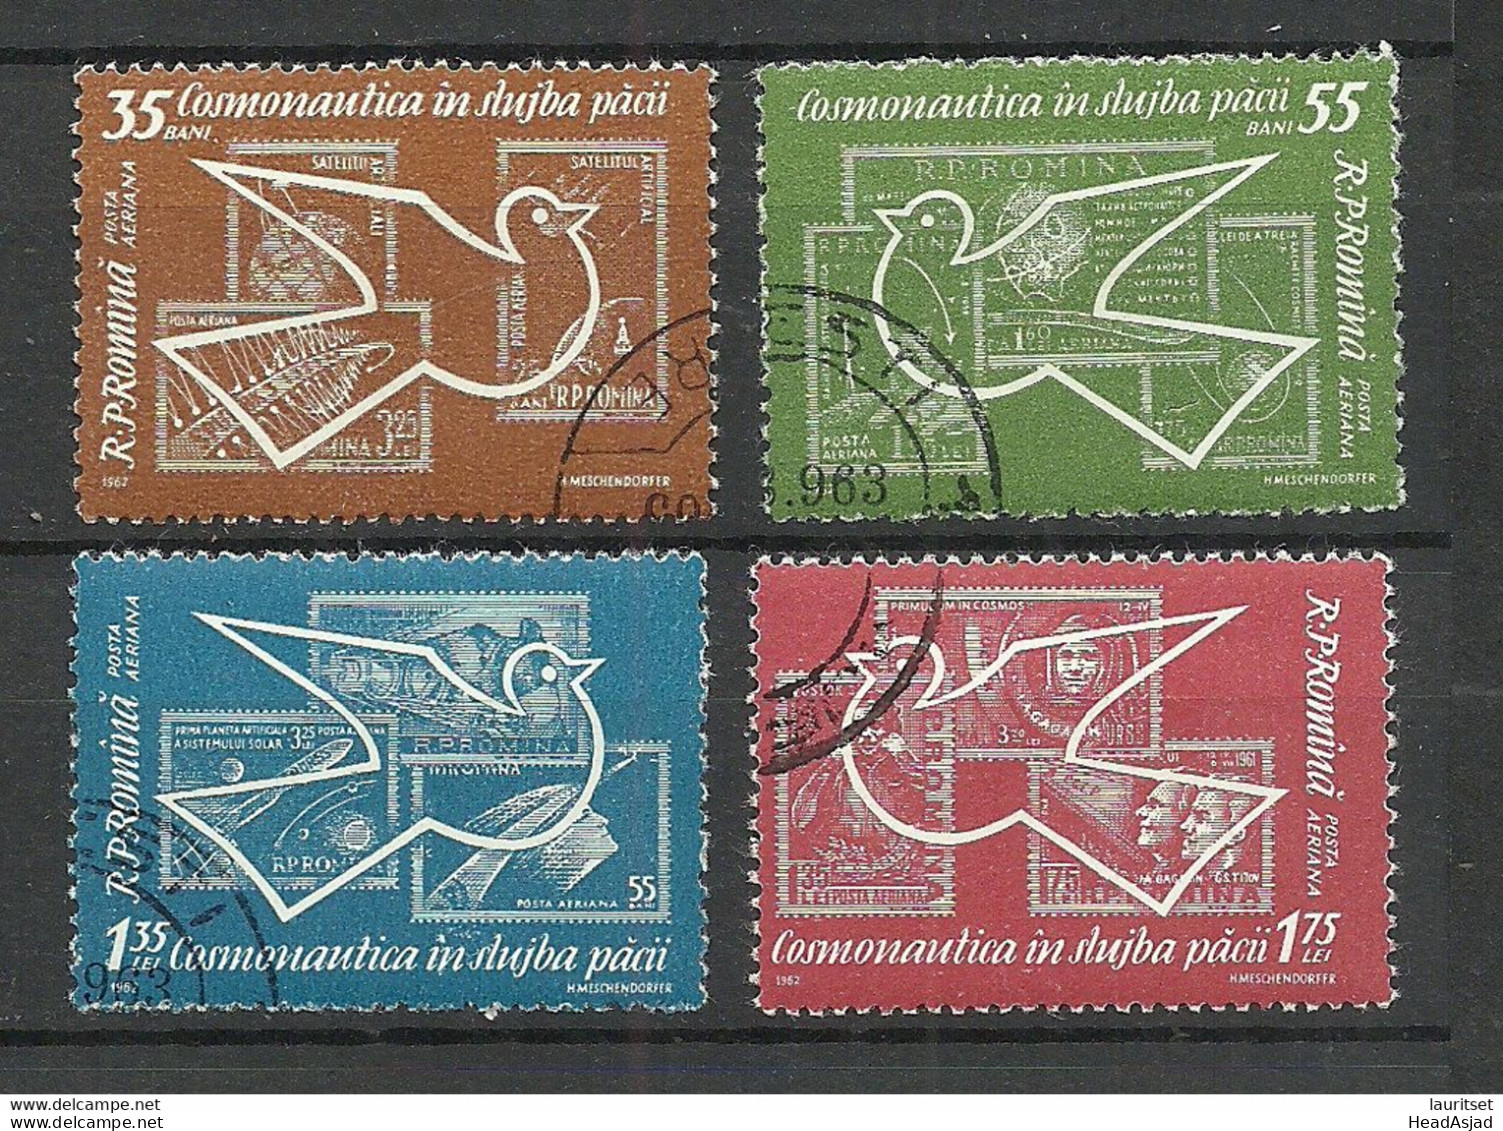 Romania 1962 Michel 2086 - 2089 Kosmonautik Space Weltraumforschung Stamps On Stamp - Stamps On Stamps